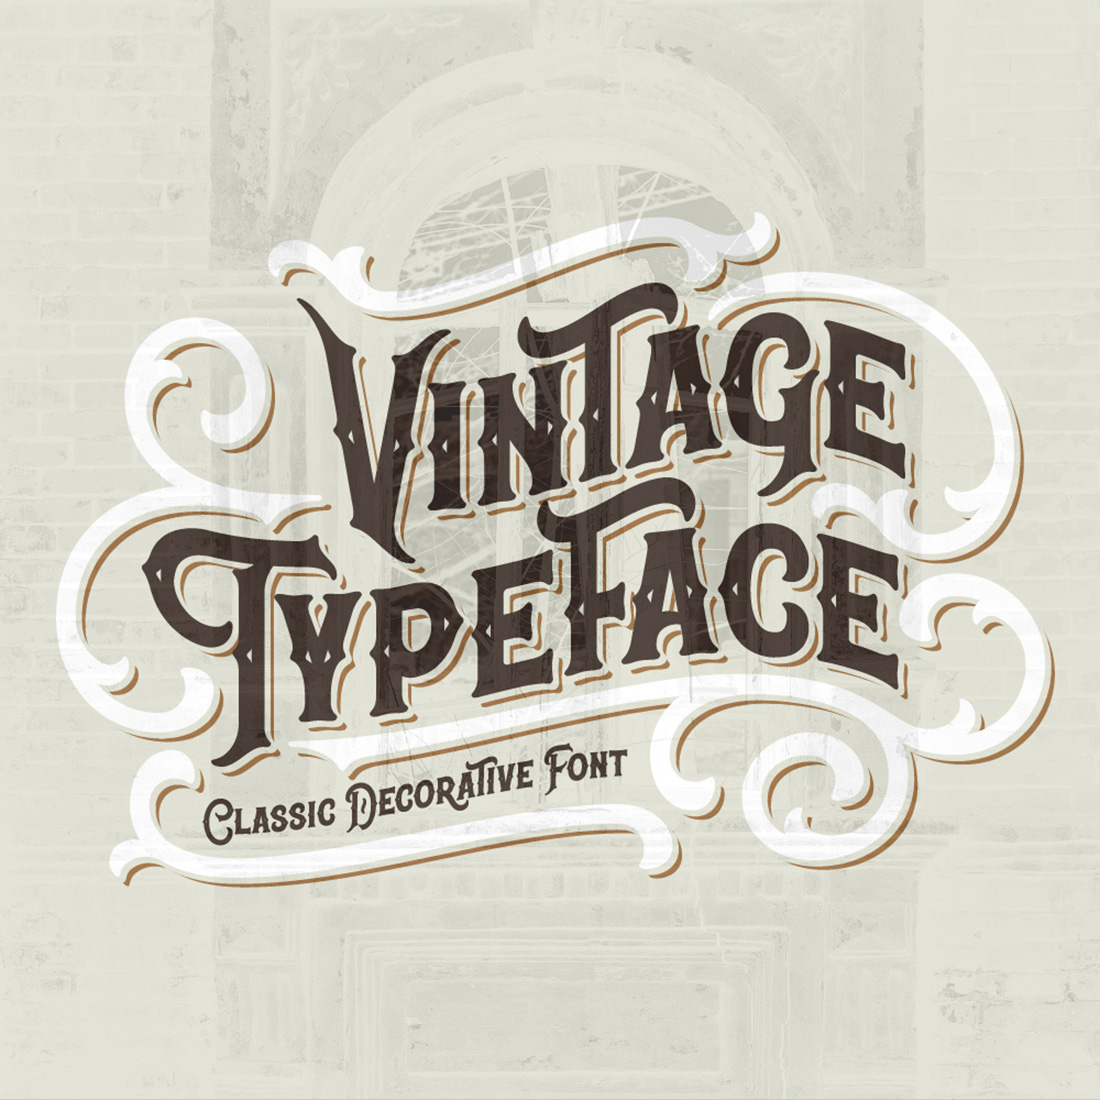 Classic Heritage Typeface light preview.